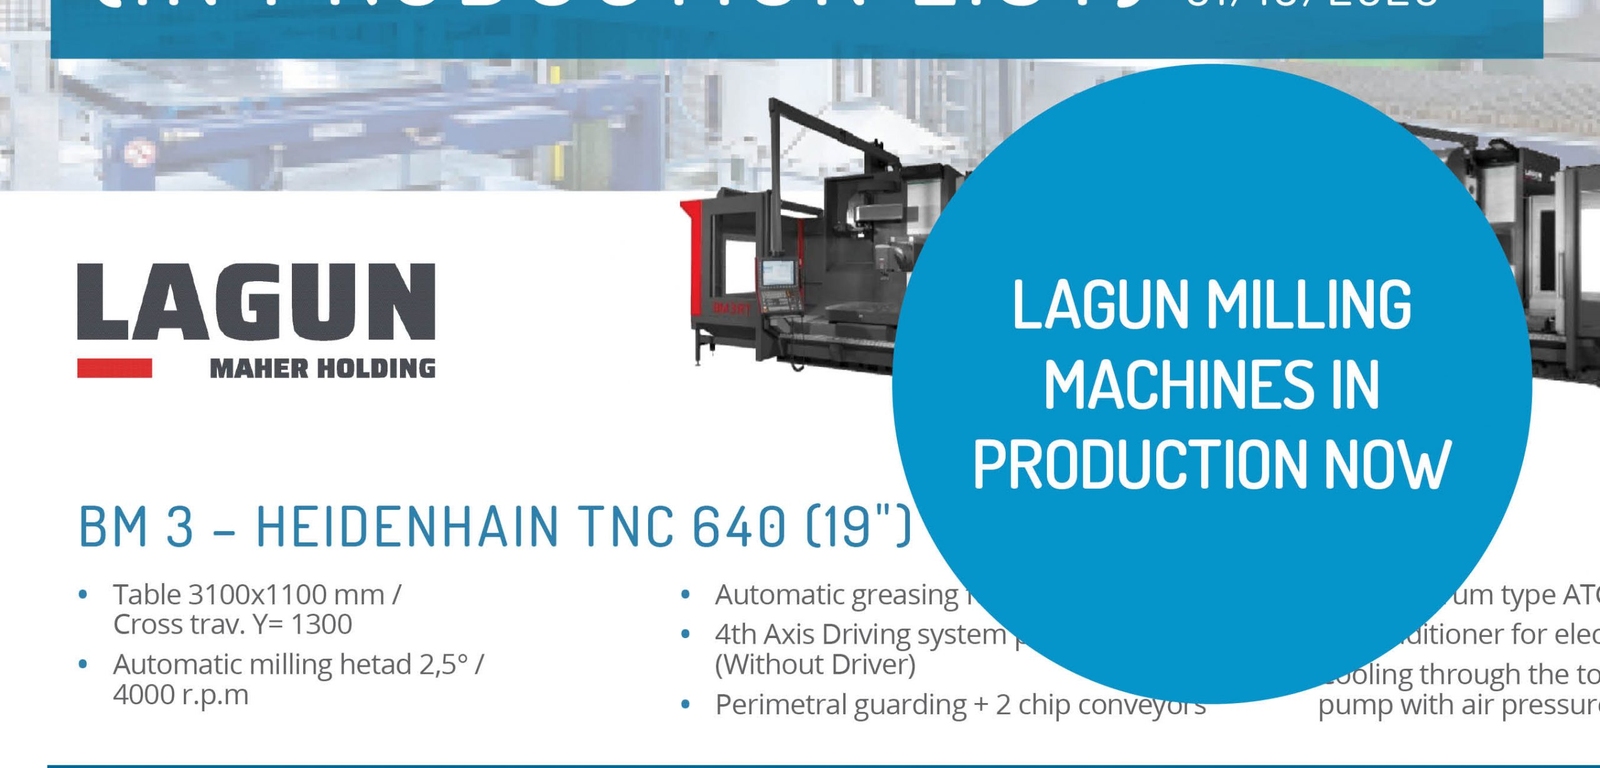 Lagun Milling Machines In Production as at October 2020